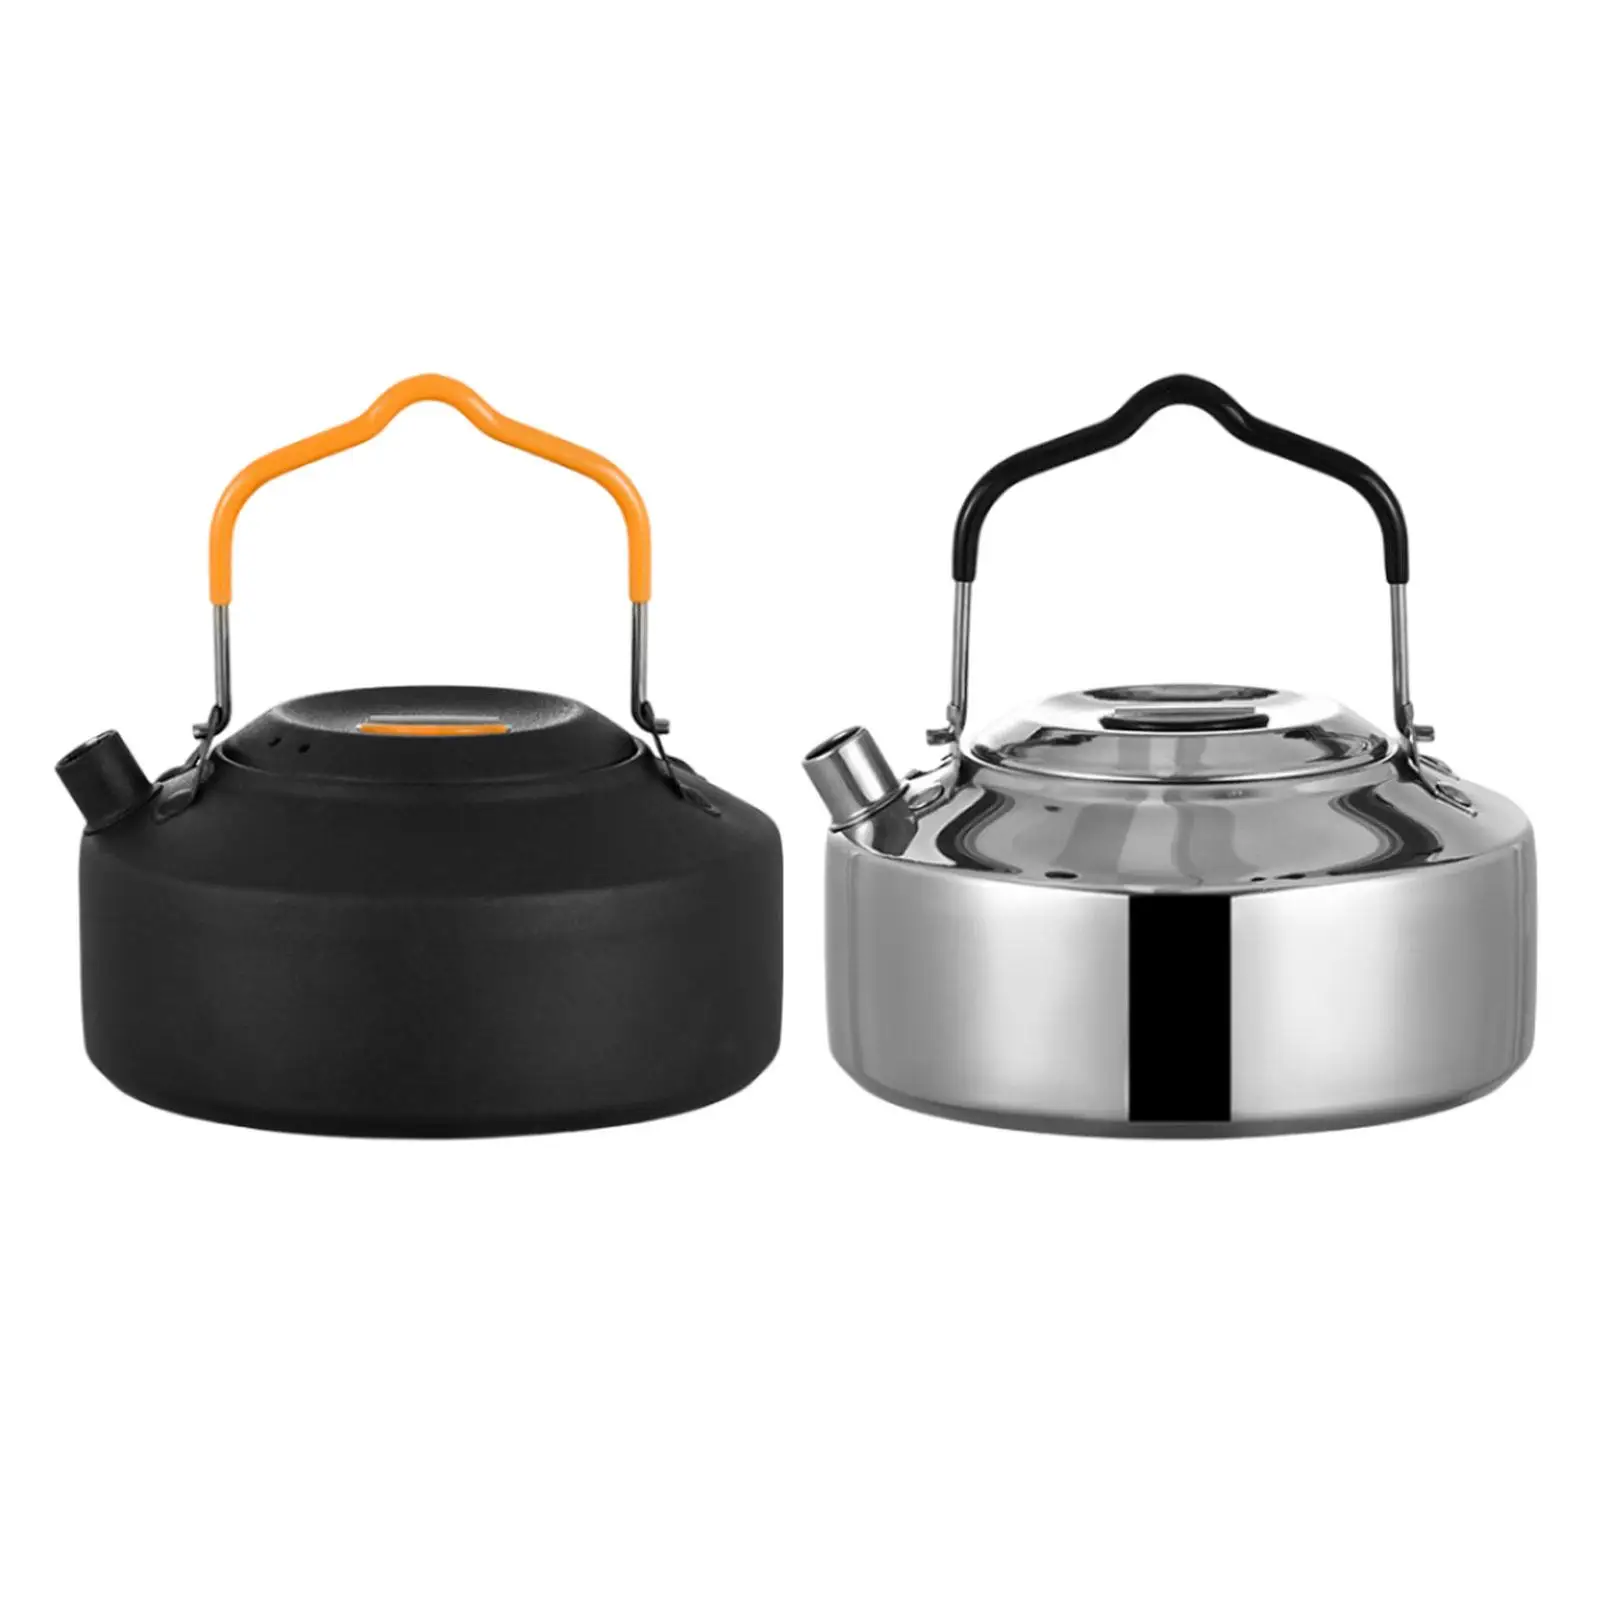 Portable Camping Kettle Stainless Steel Tea Kettle Coffee Pot With Insulated